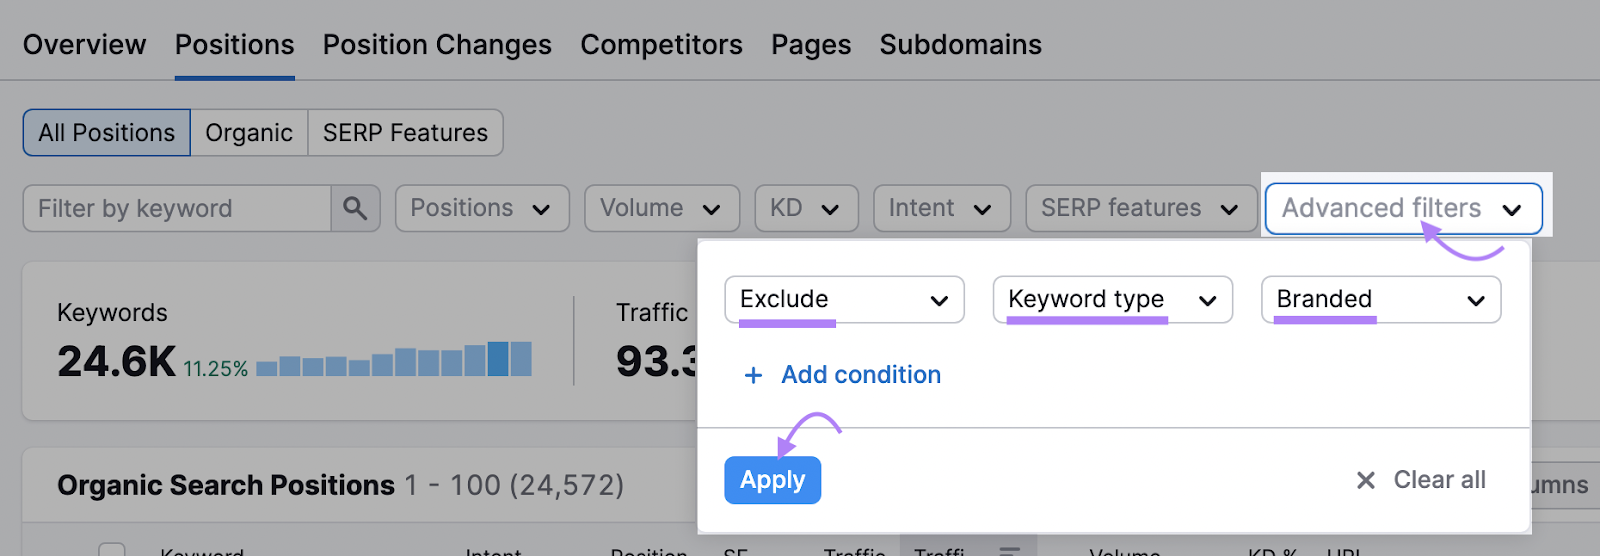 exclude competitor’s branded keywords from the list